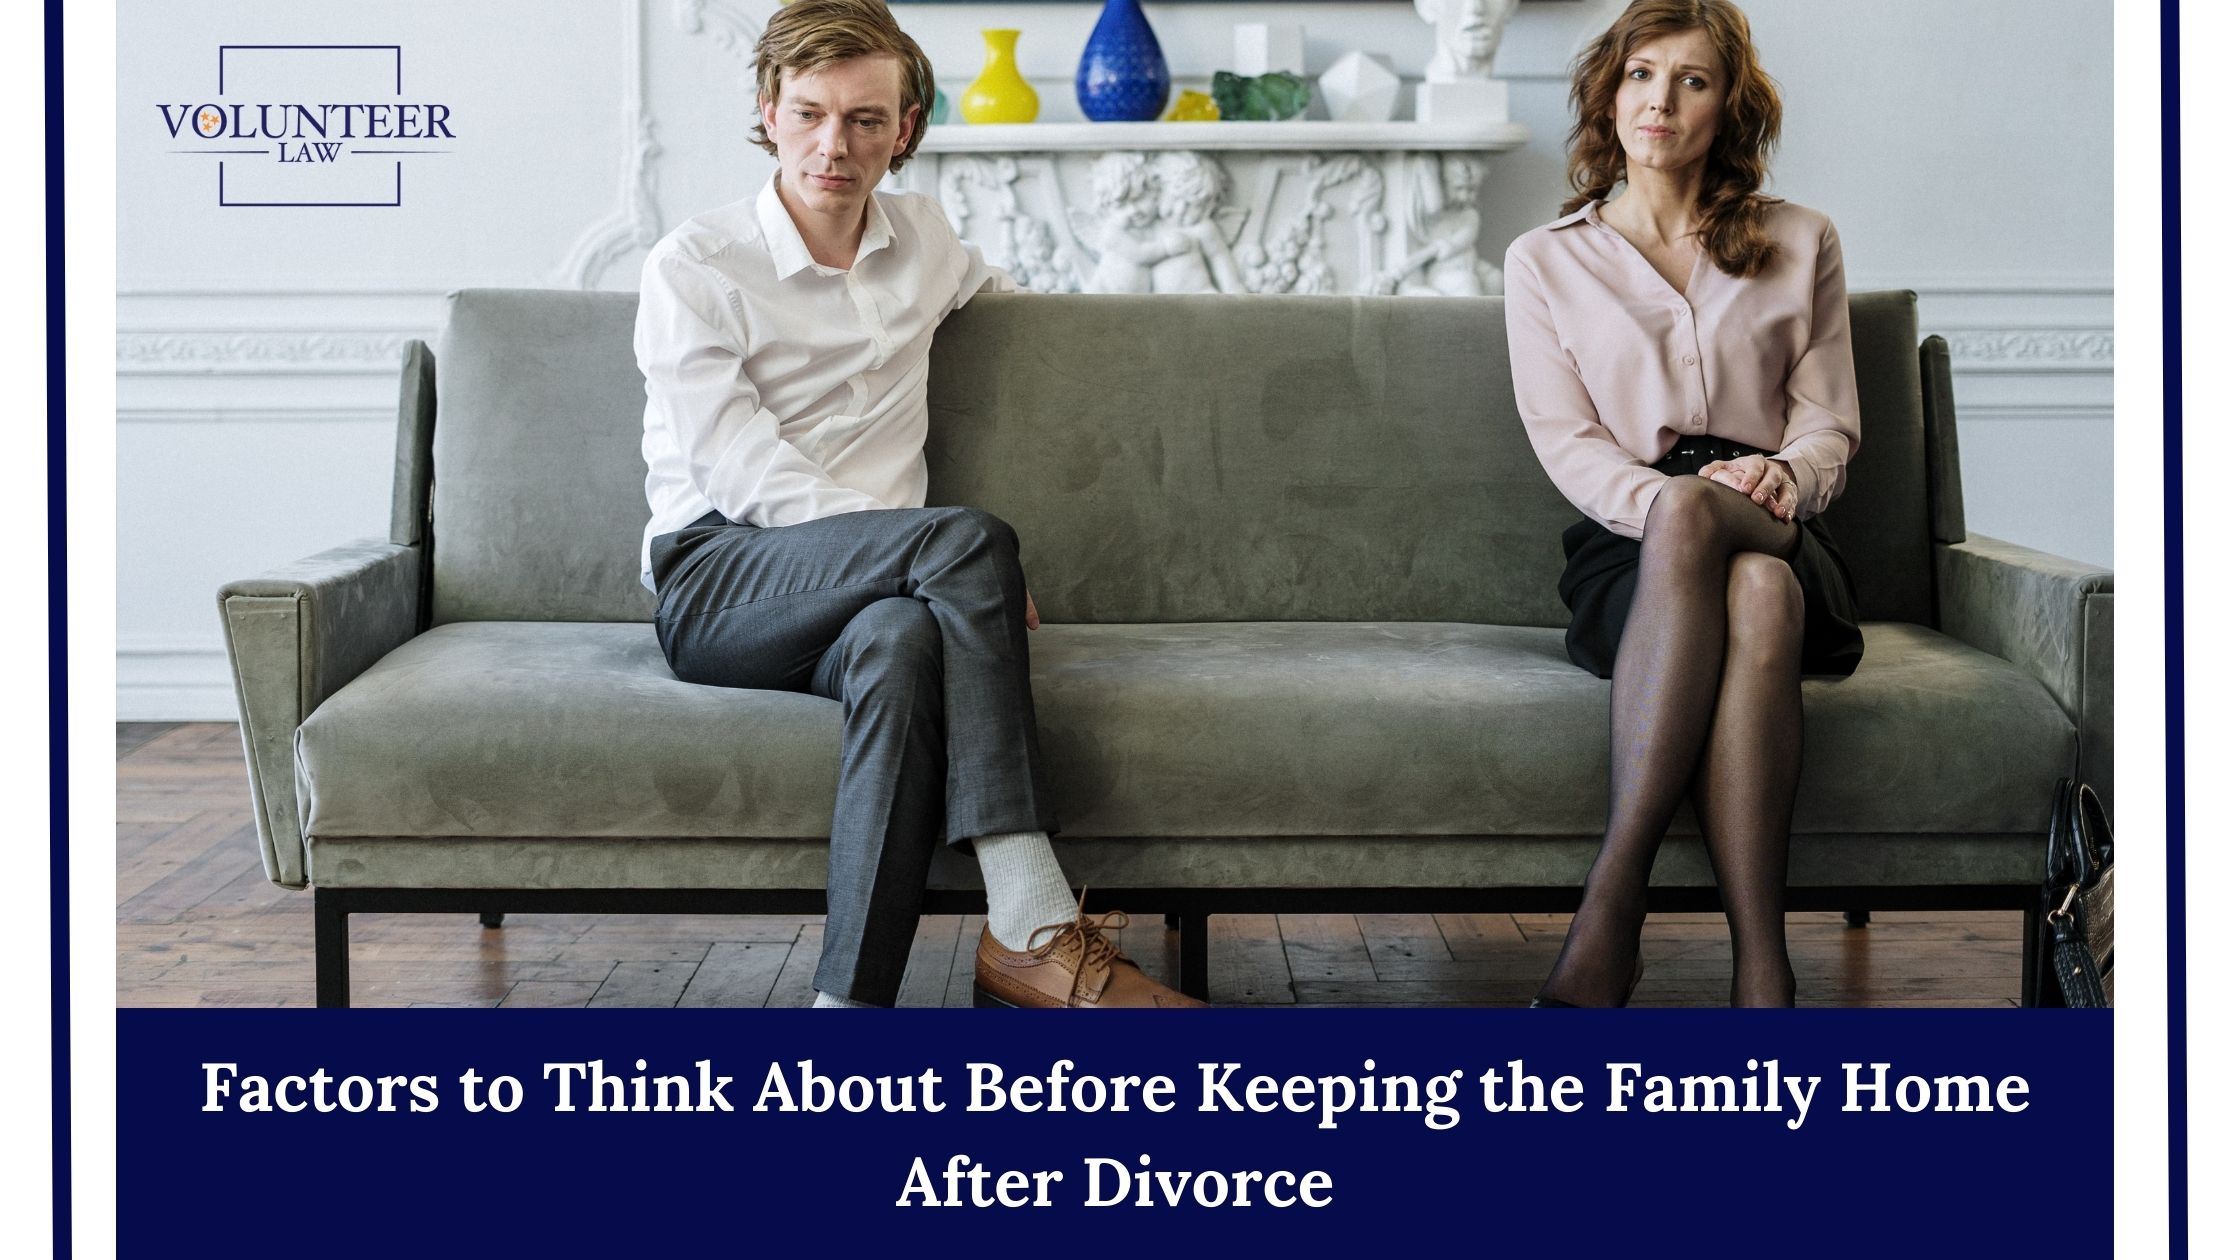 Factors to Think About Before Keeping the Family Home After Divorce